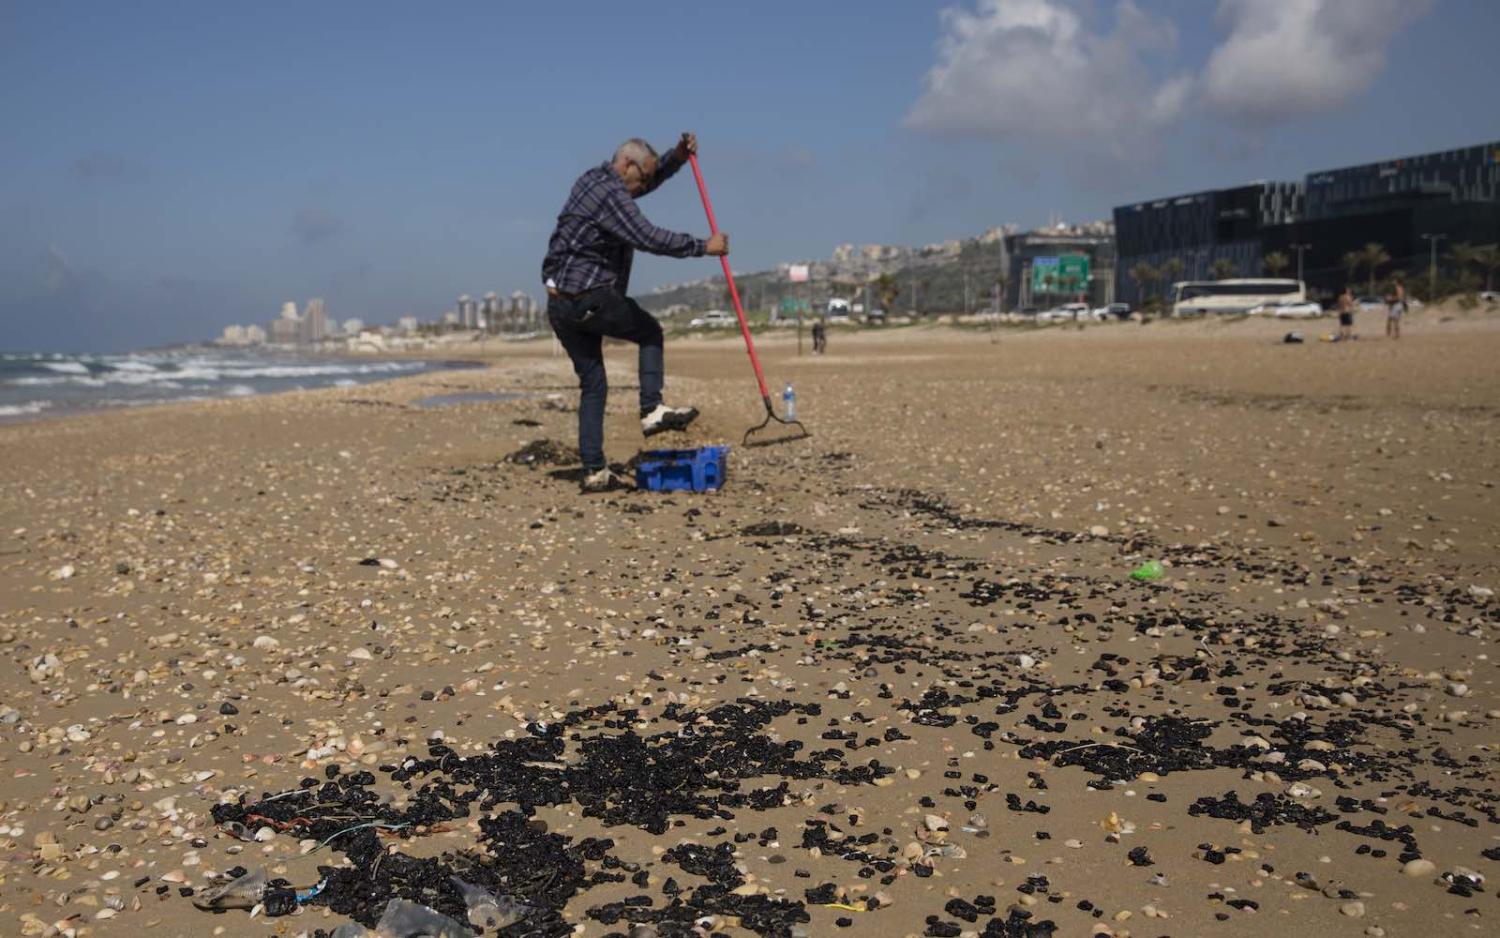 Cleaning tar from a beach in Haifa, Israel, following a suspicious oil spill in the Mediterranean, 25 February (Amir Levy/Getty Images)